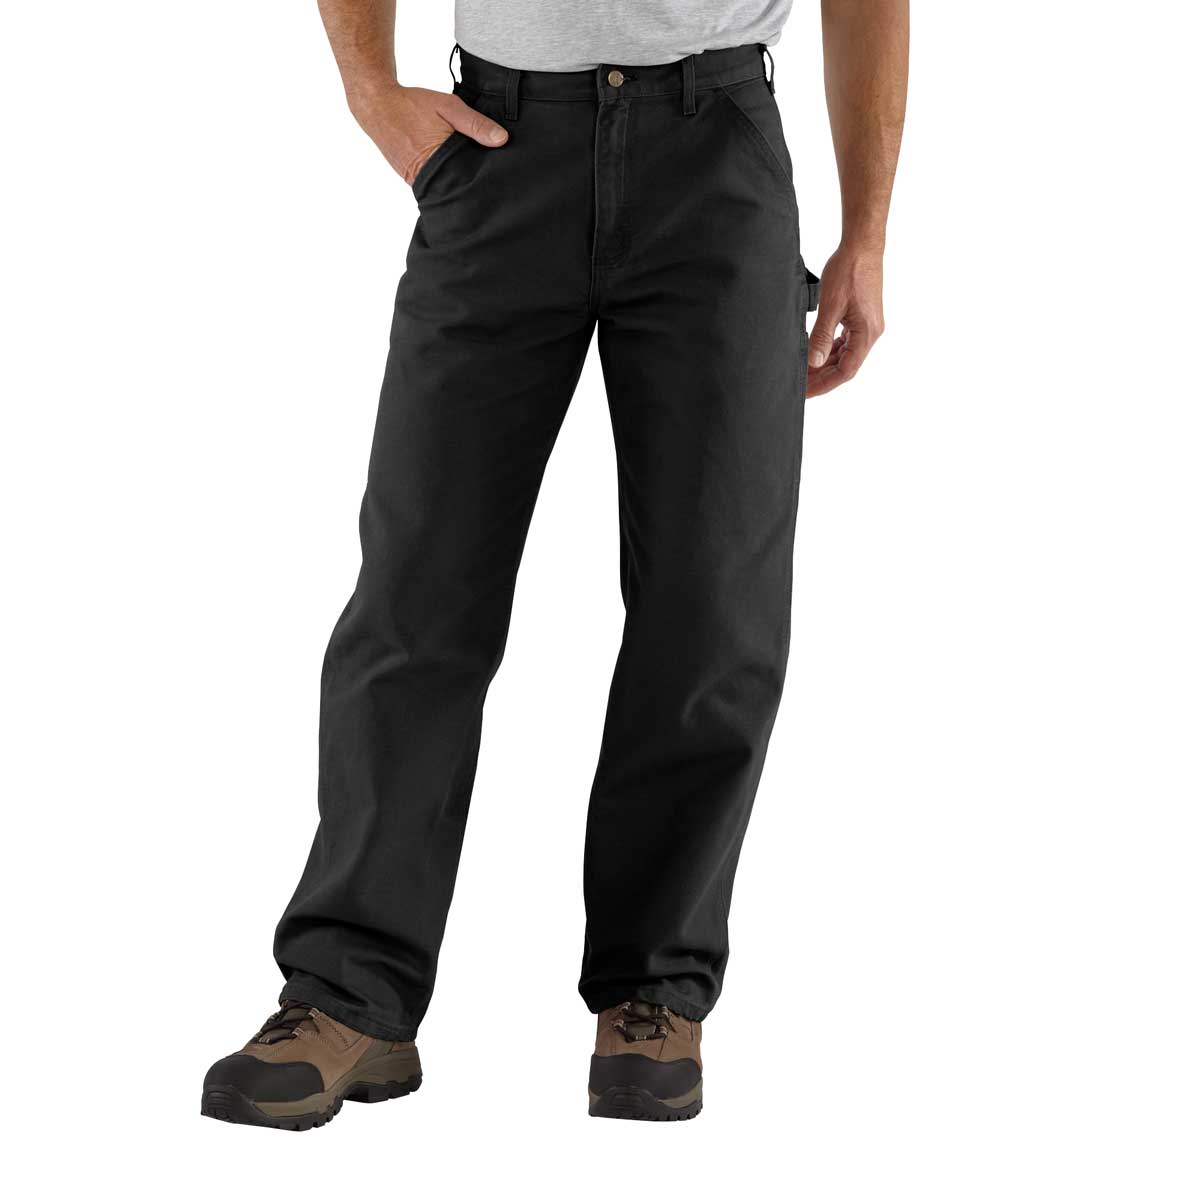 Carhartt Loose Fit Washed Duck Utility Work Pant, Waist Sizes 40"-54"